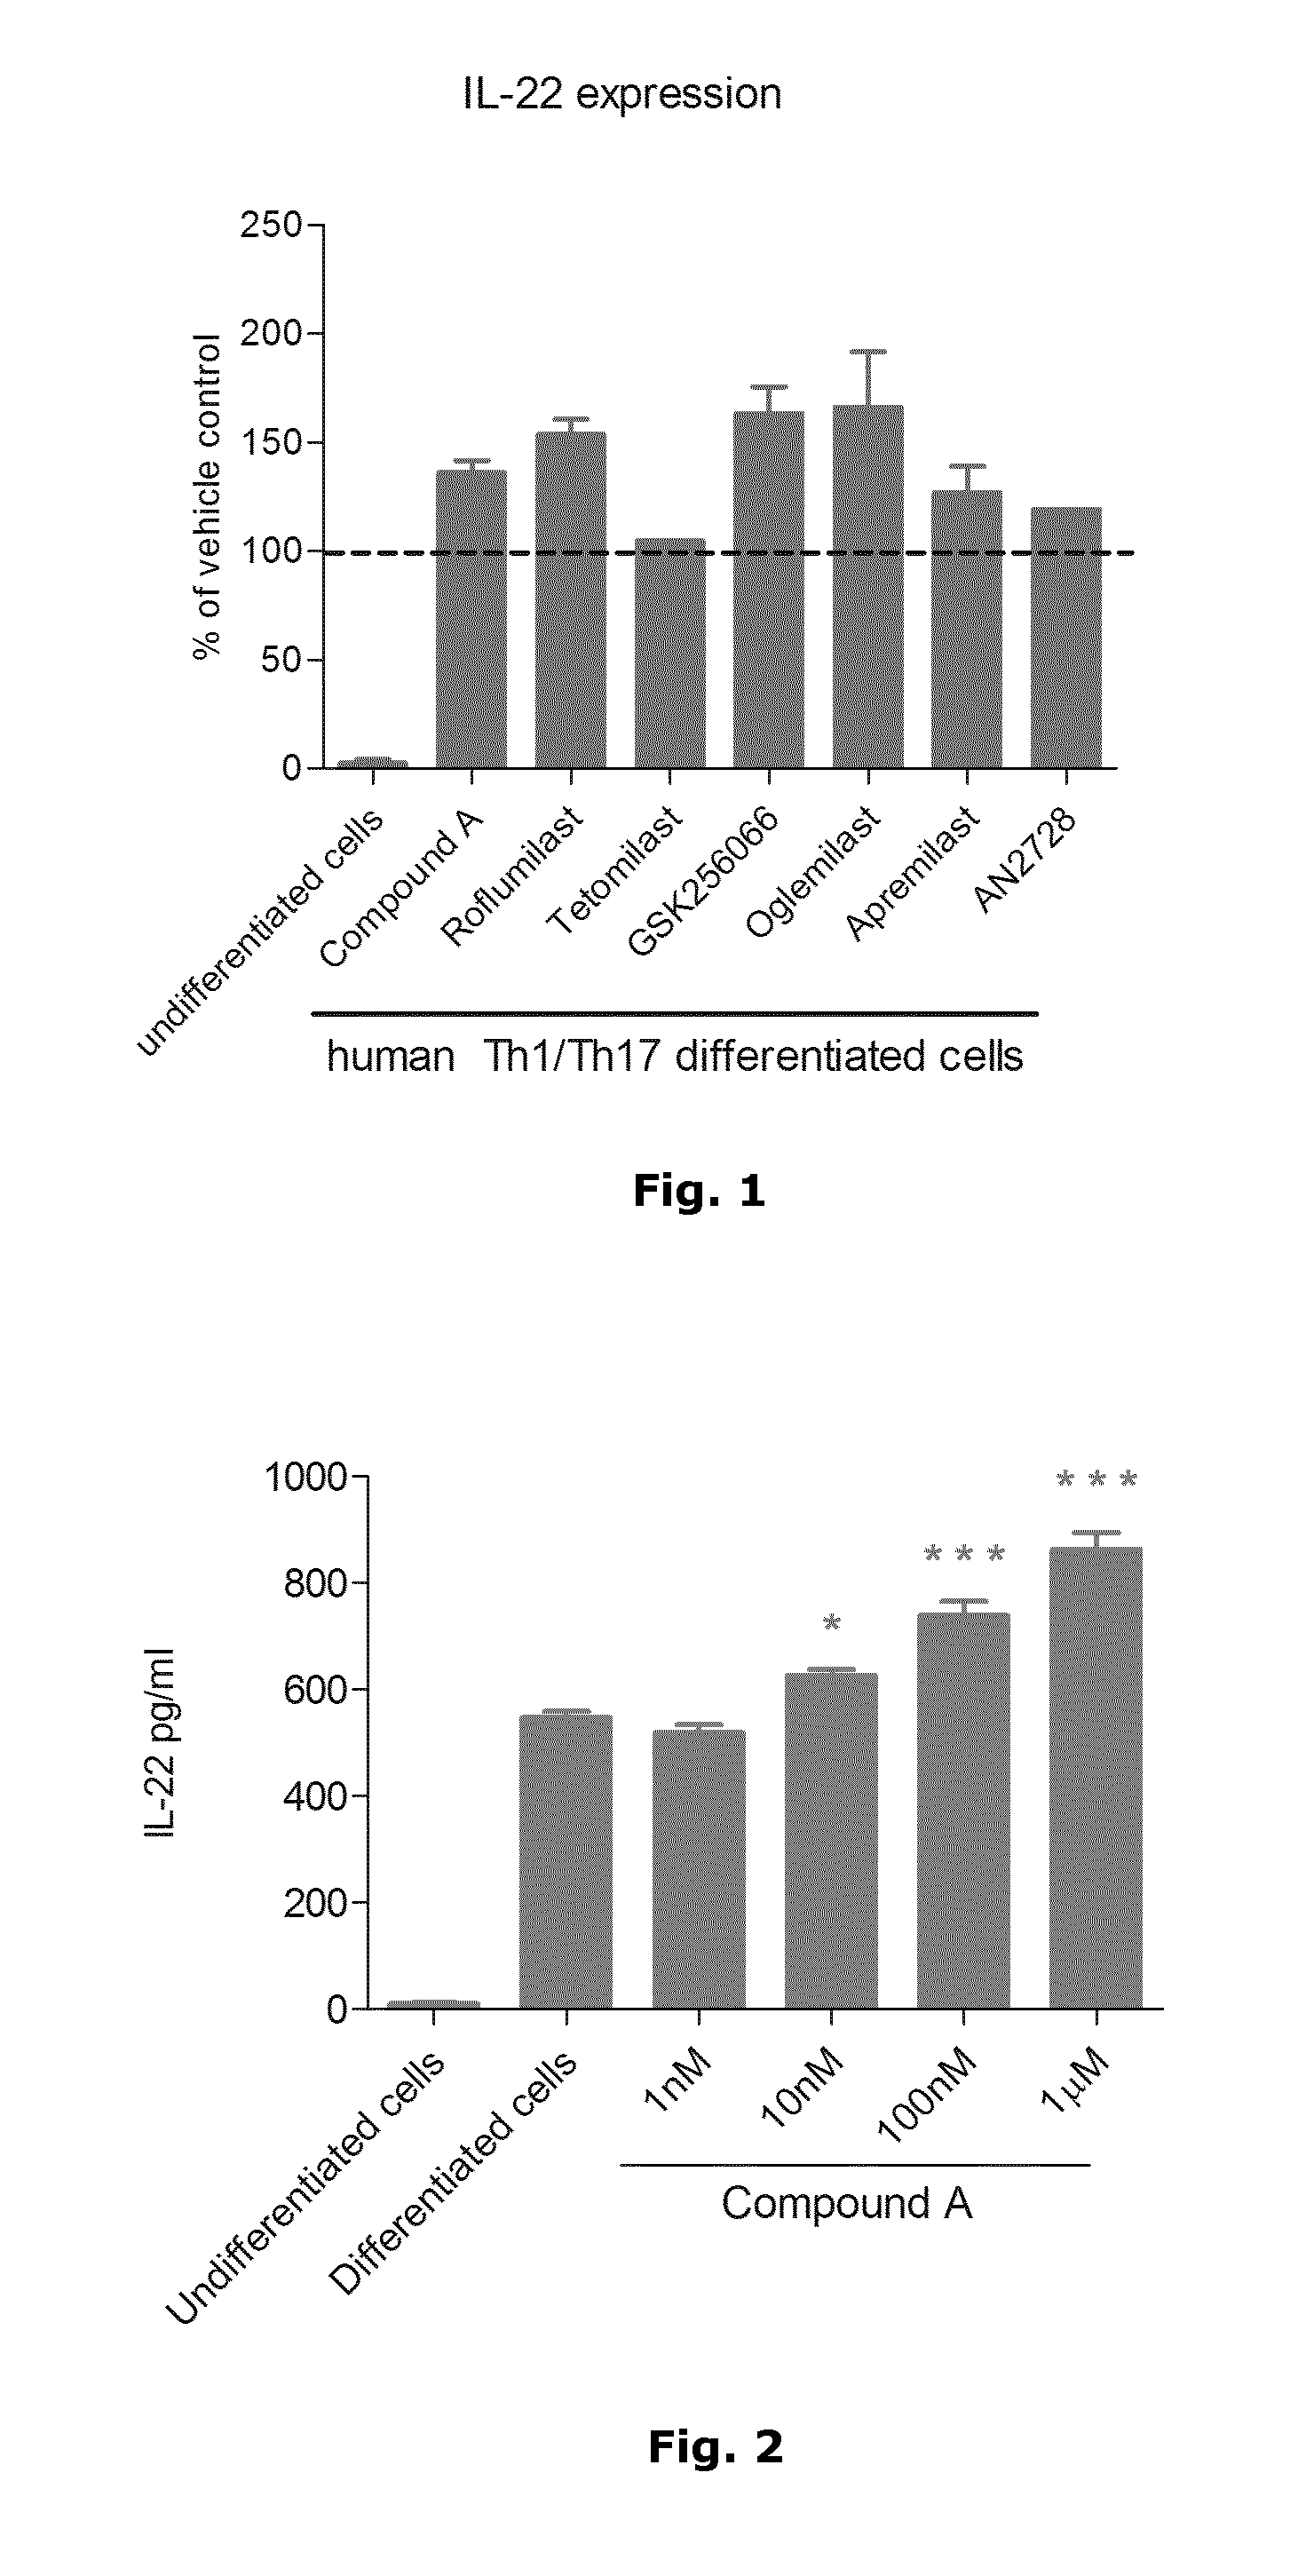 A method of inhibiting the expression of il-22 in activated t-cells